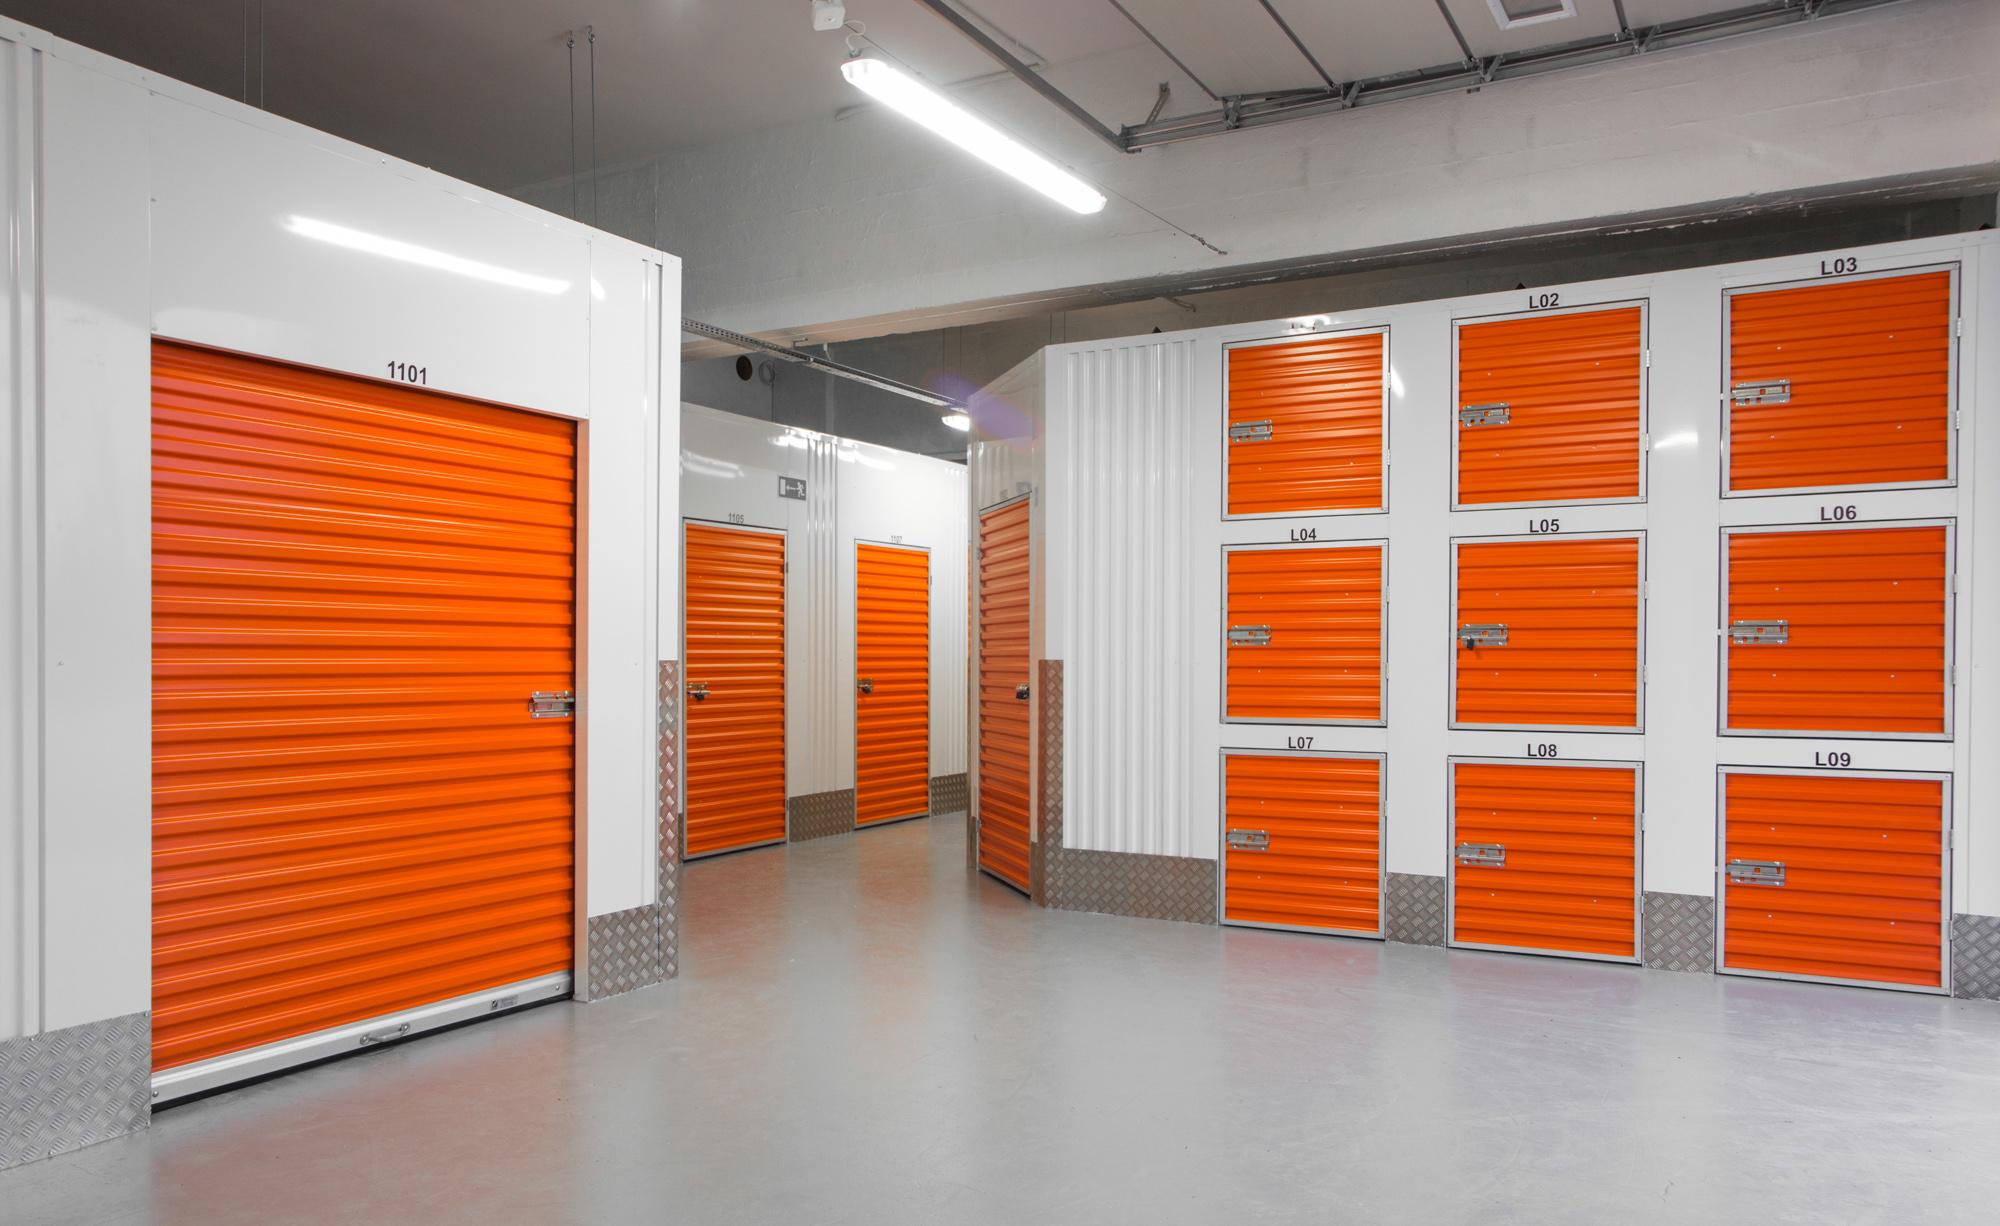 Top 4 Shipping Container Storage Tips To Maximize Space